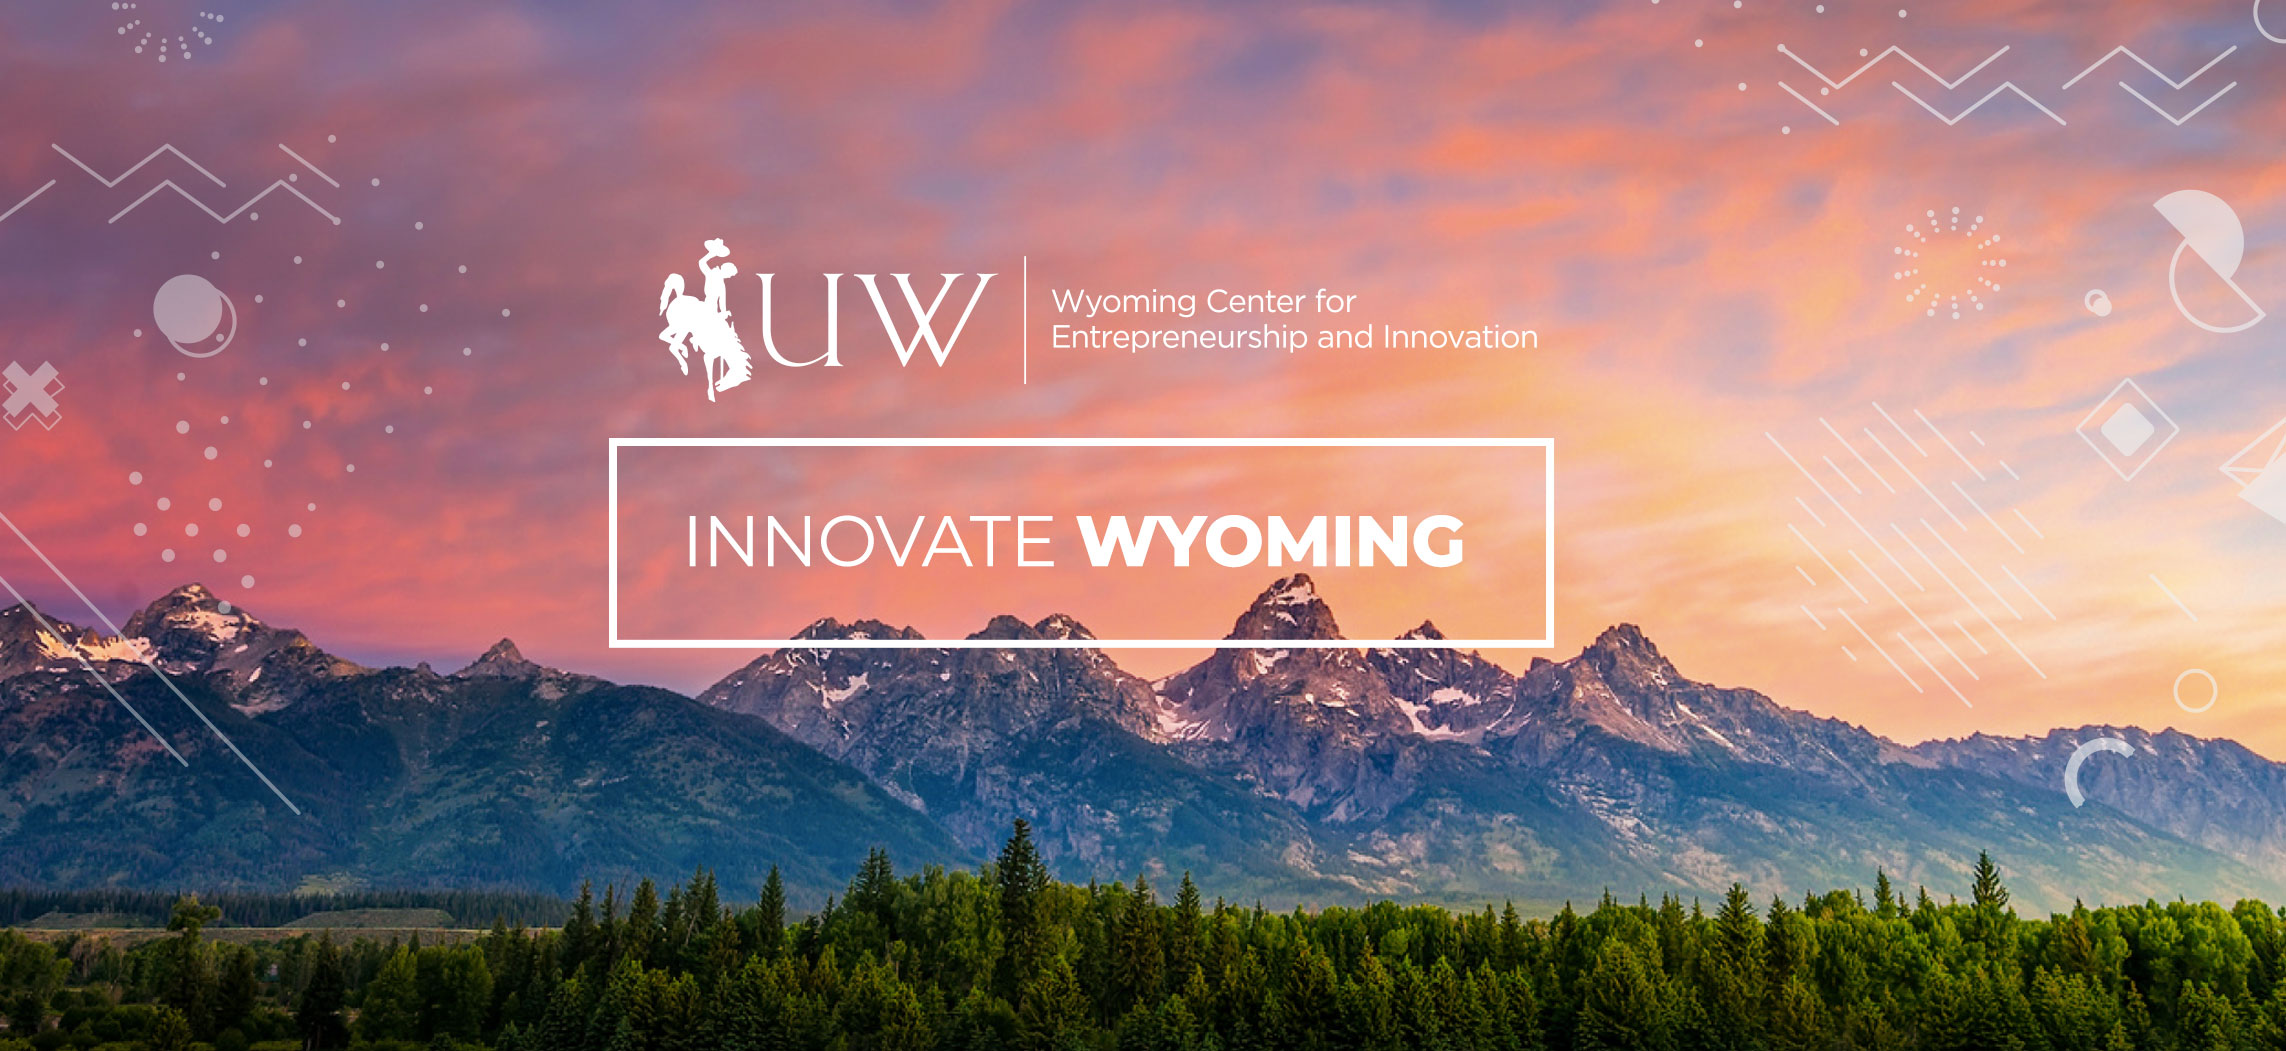 Innovate Wyoming with the Wyoming Center for Entrepreneurship and Innovation logo over mountains